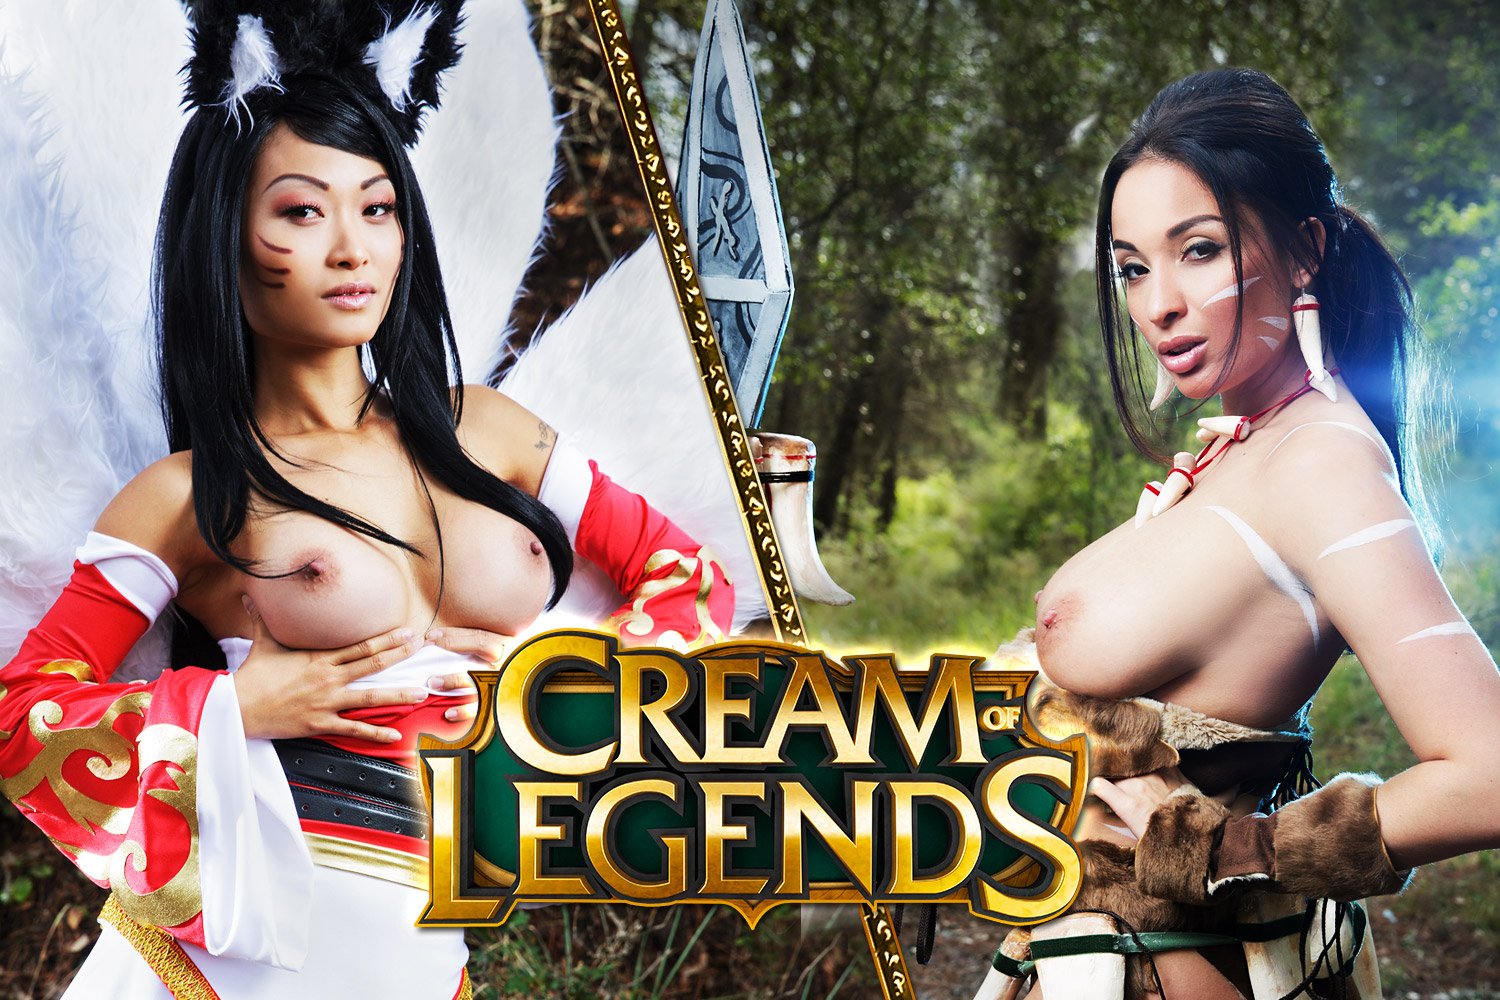 League Of Legends XXX Parody in Virtual Reality [VIDEO]